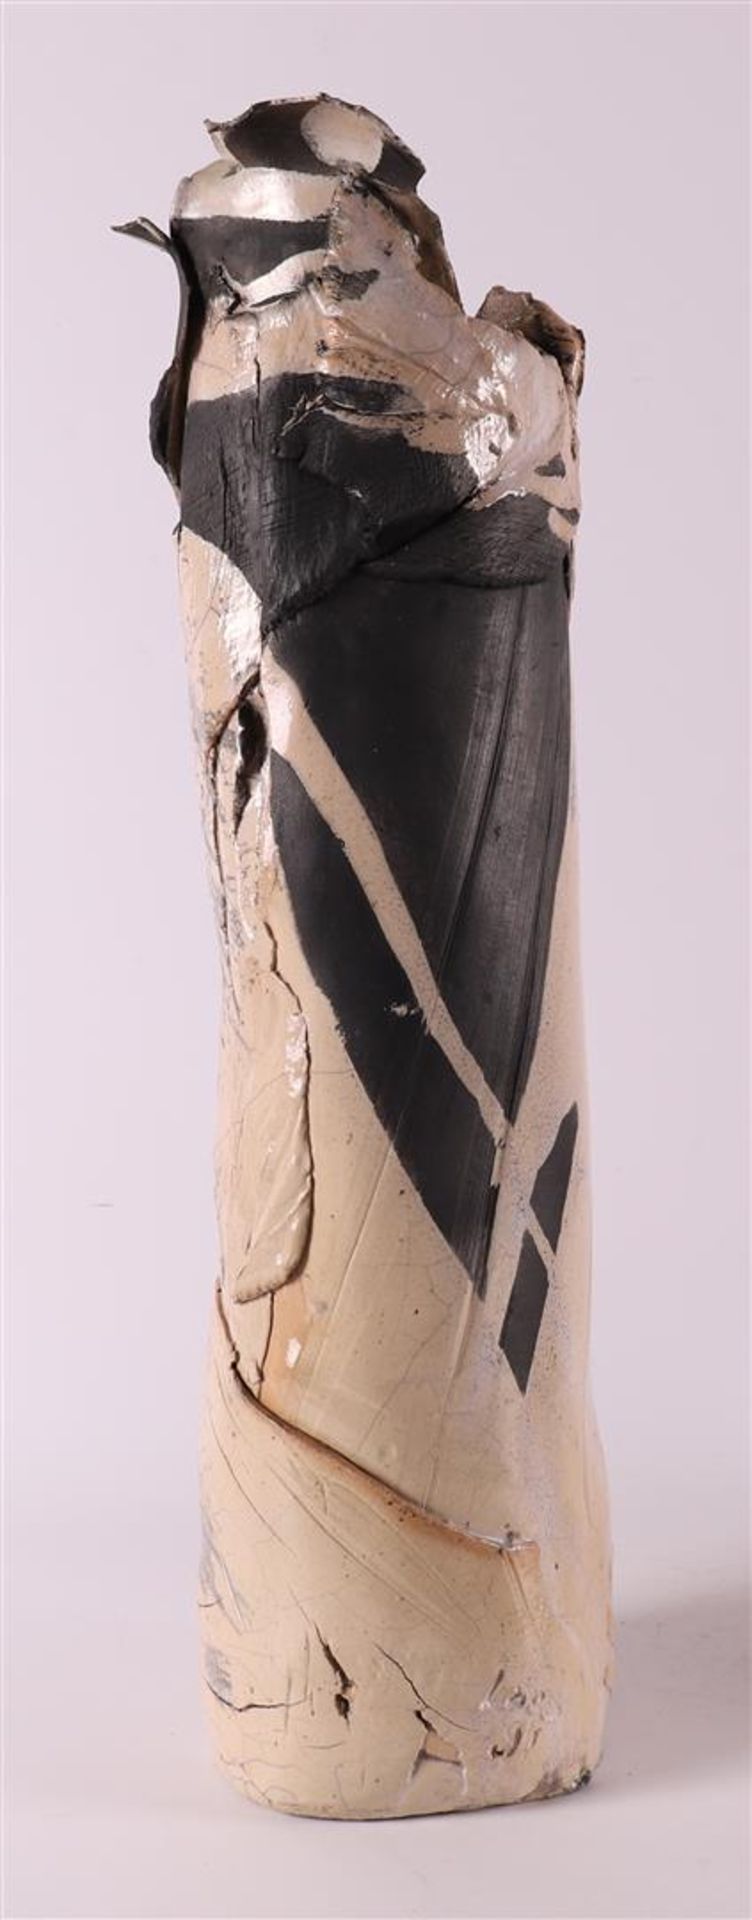 A polychrome ceramic vase, signed 'Loes 91' (= possibly Loes Koster). - Image 8 of 18